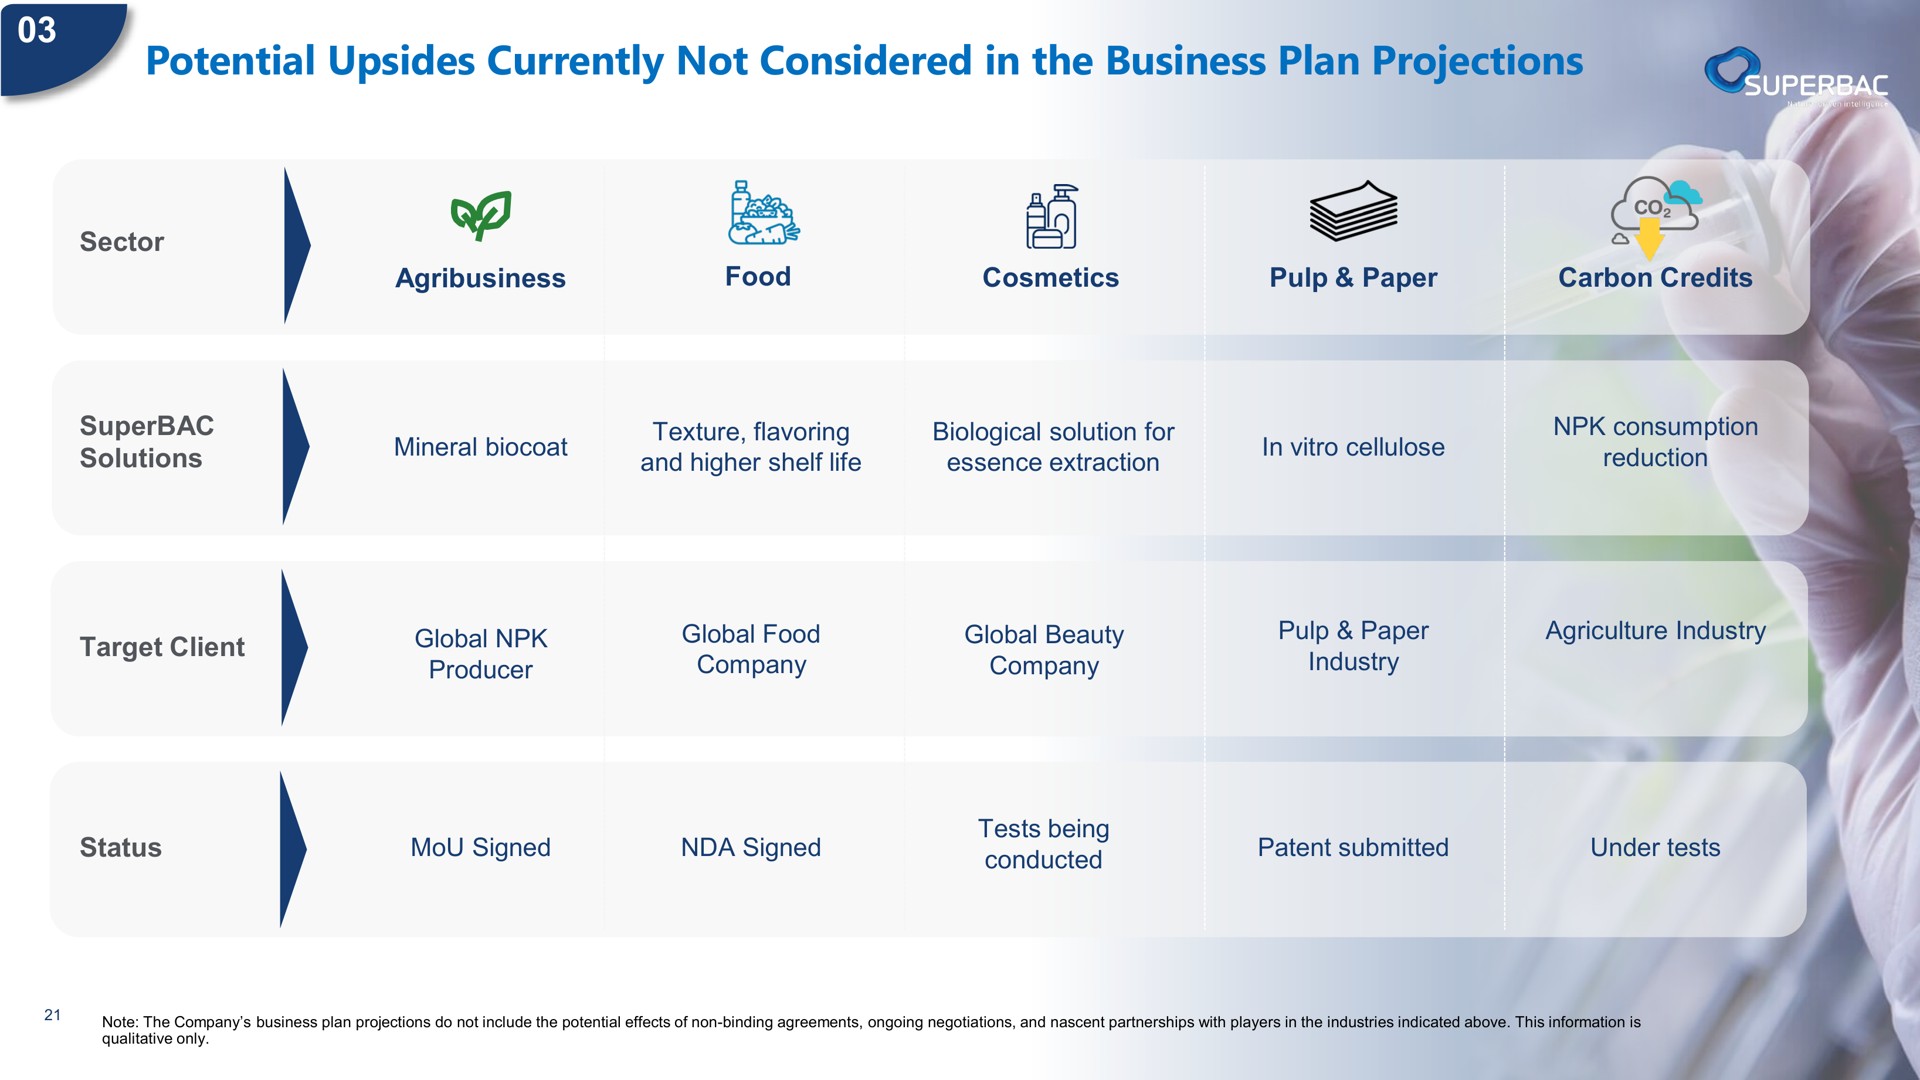 potential upsides currently not considered in the business plan projections | Superbac